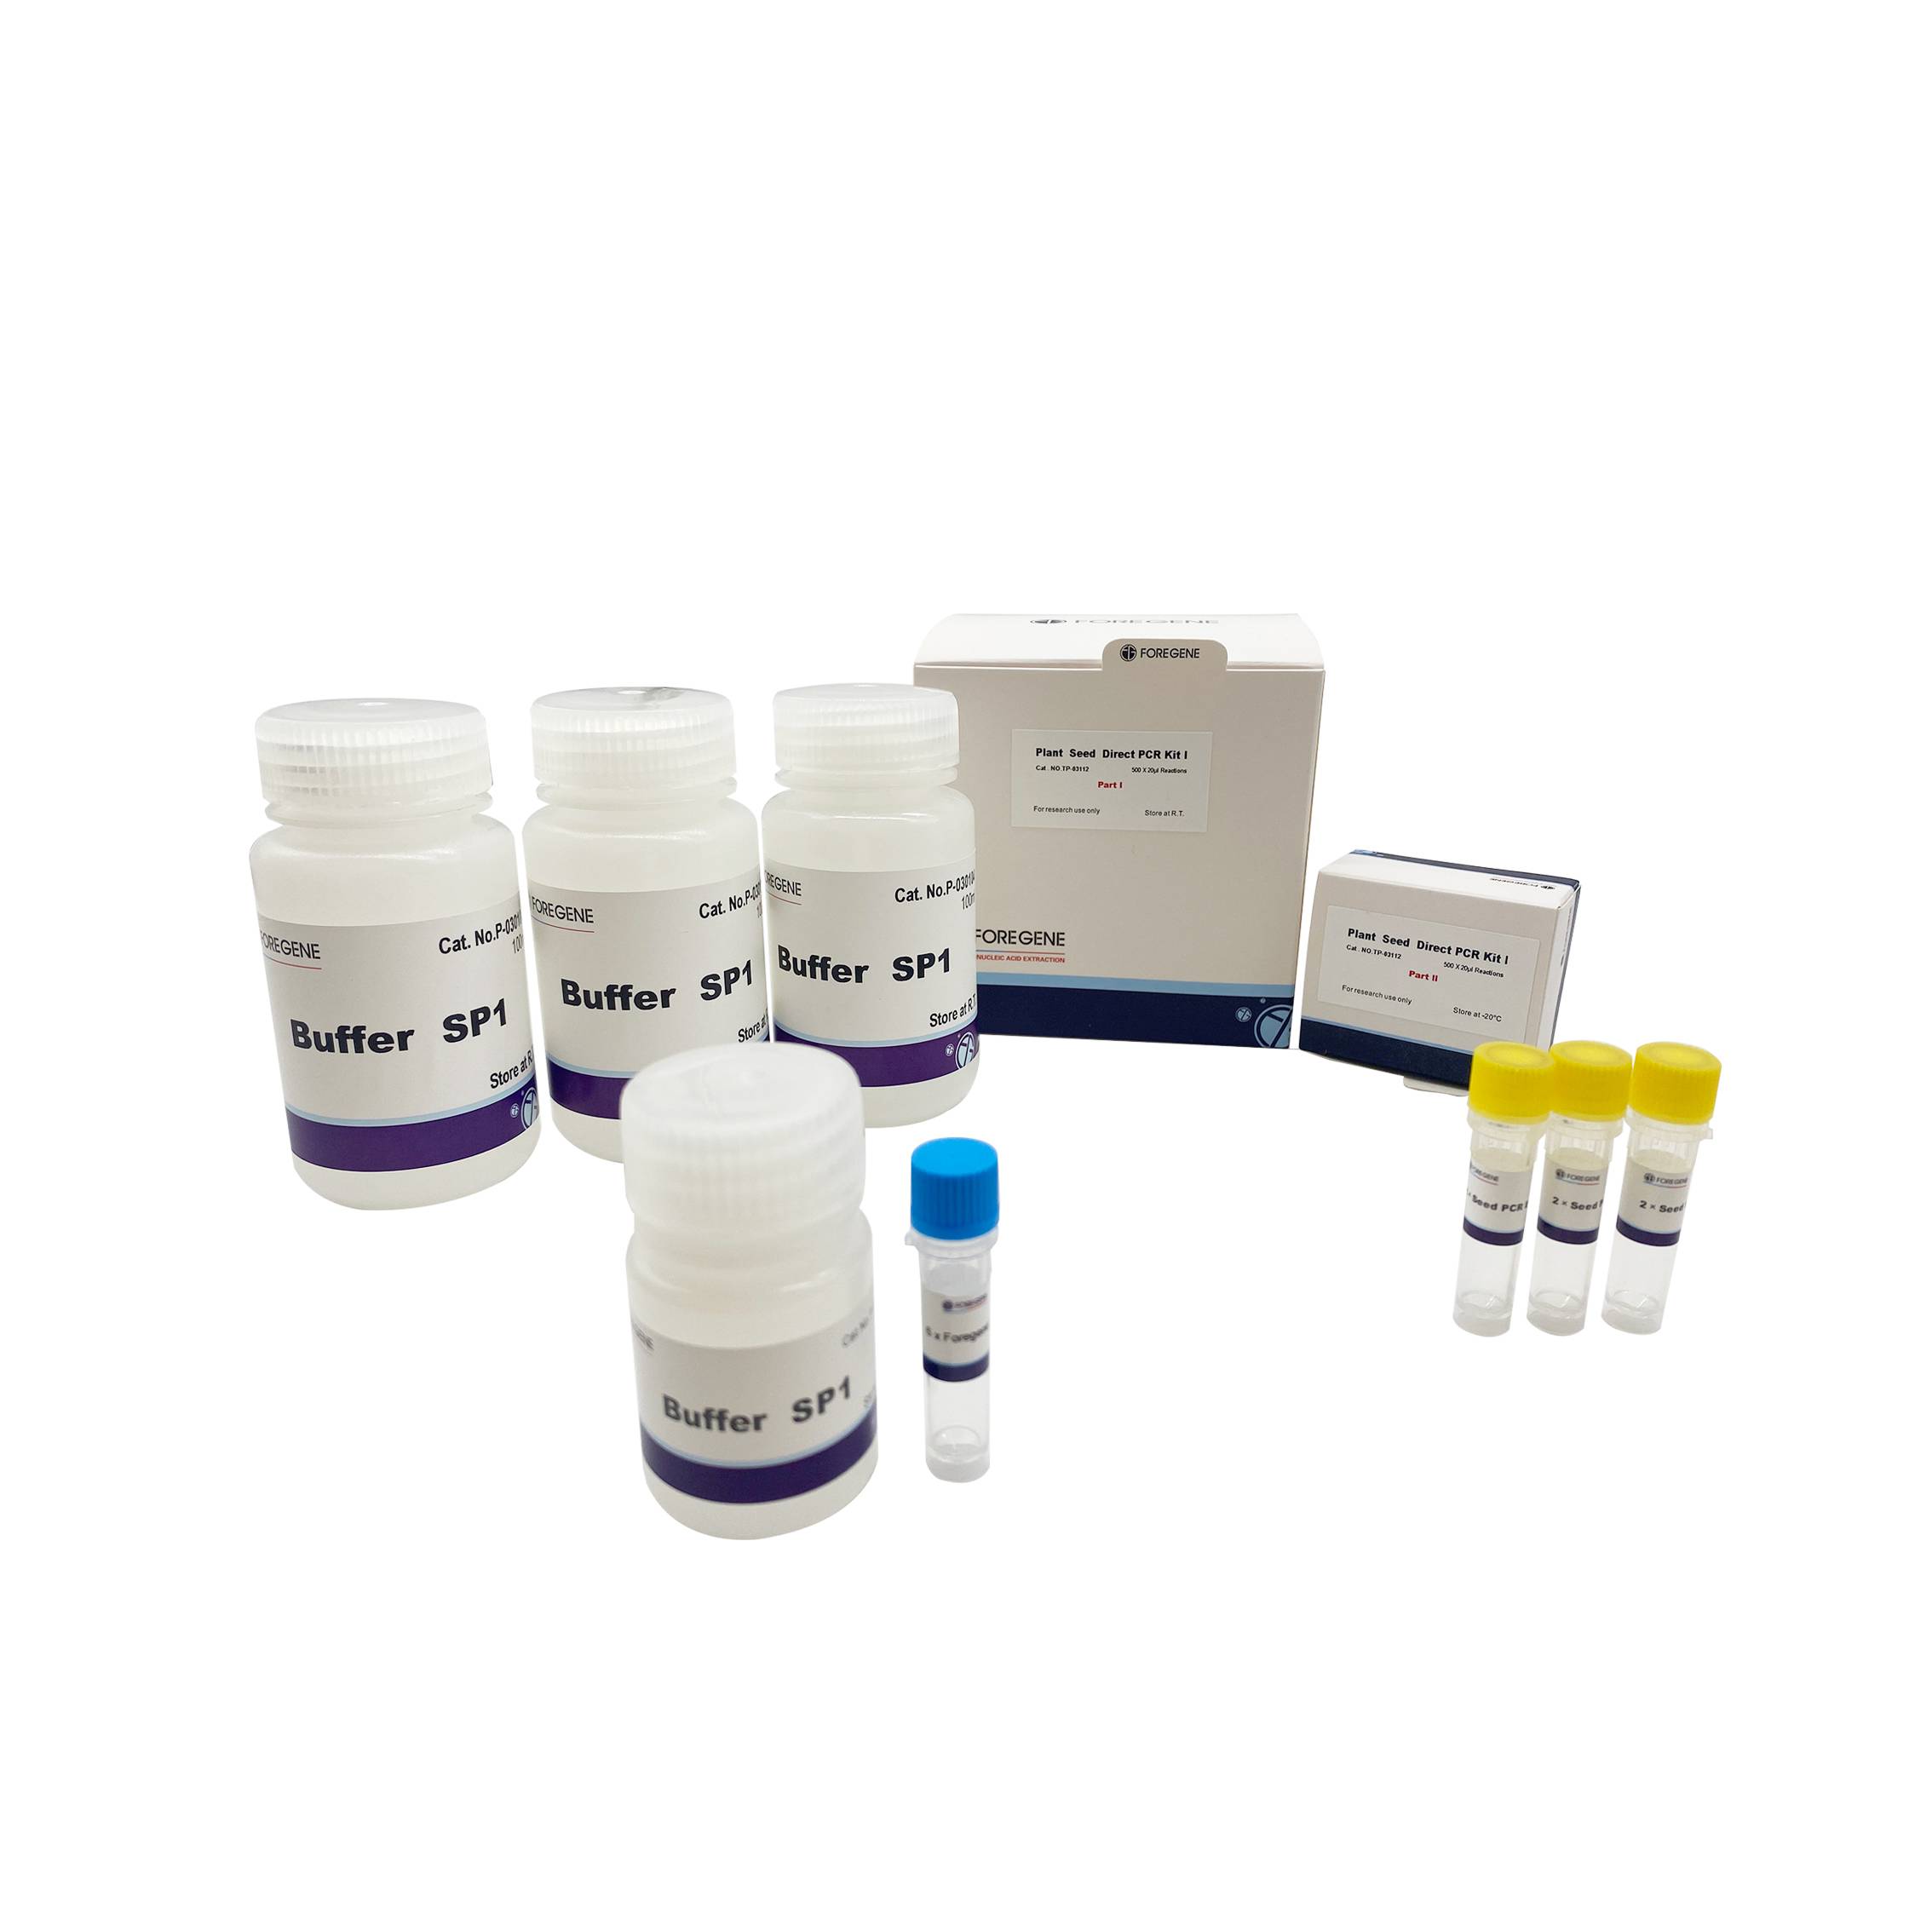 Plant Seed Direct PCR Kit I/II (without Sampling Tools) Protocol Plant Direct PCR Kits